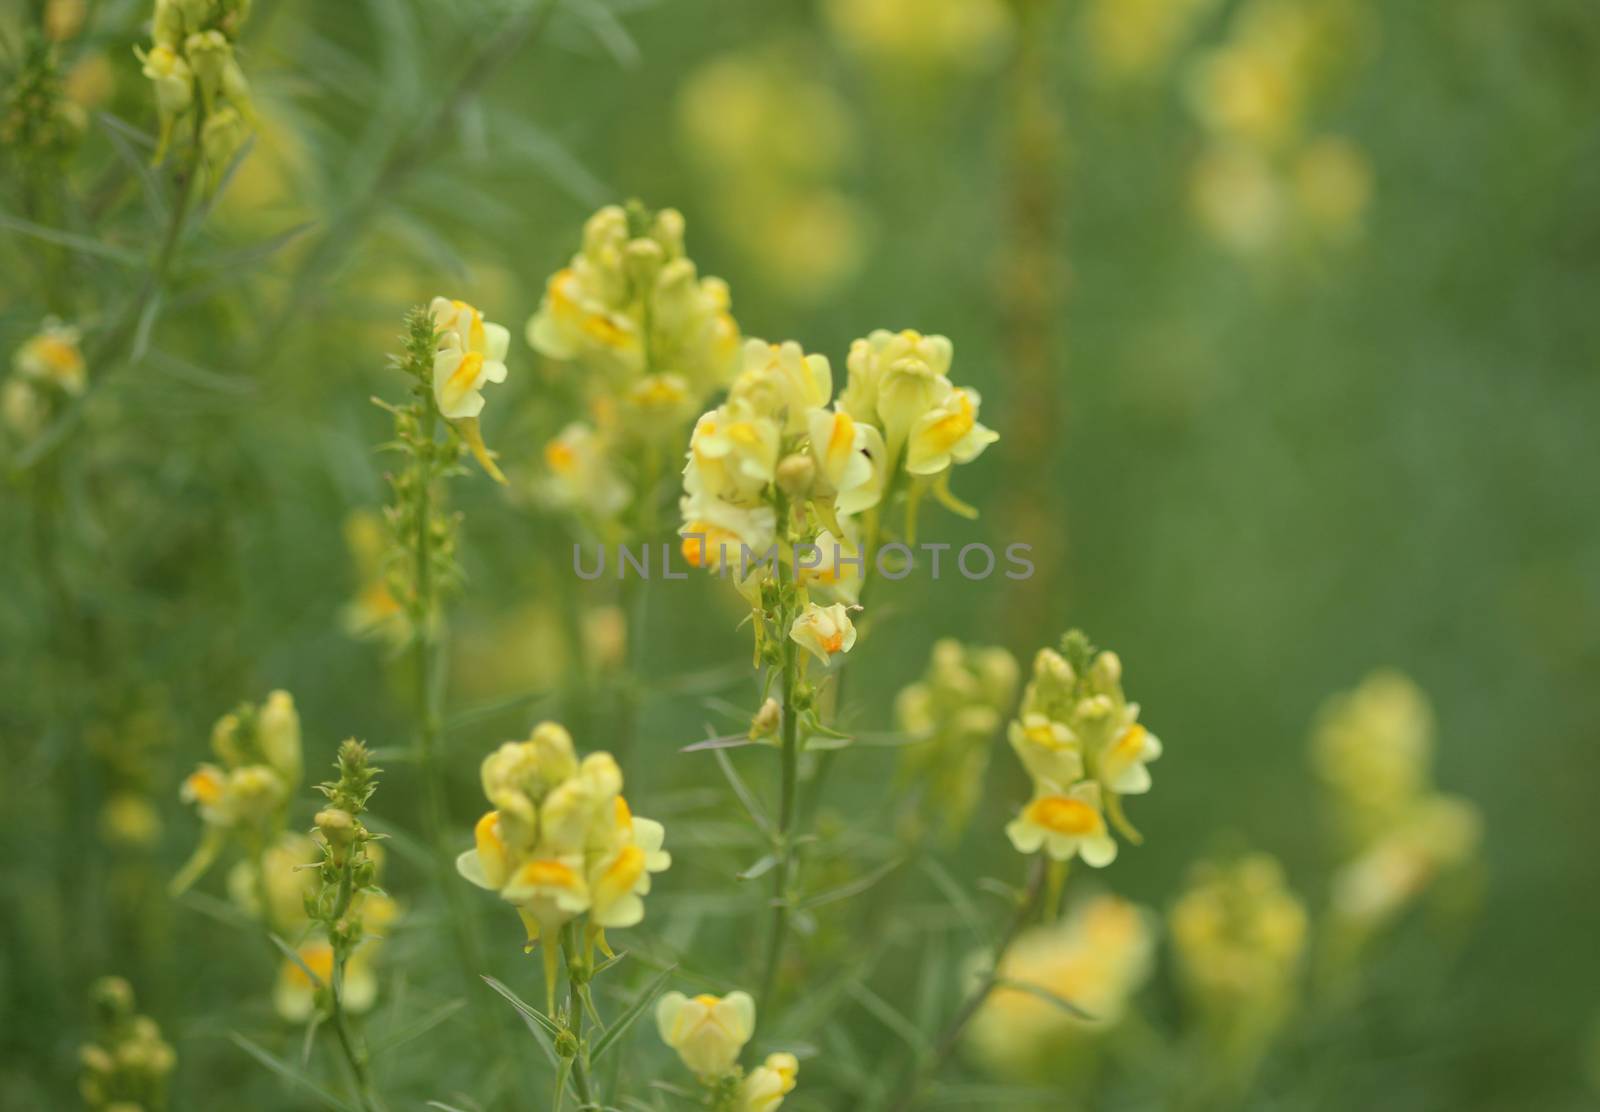 close up of Linaria vulgaris, names are common toadflax, yellow toadflax, or butter-and-eggs, blooming in the summer